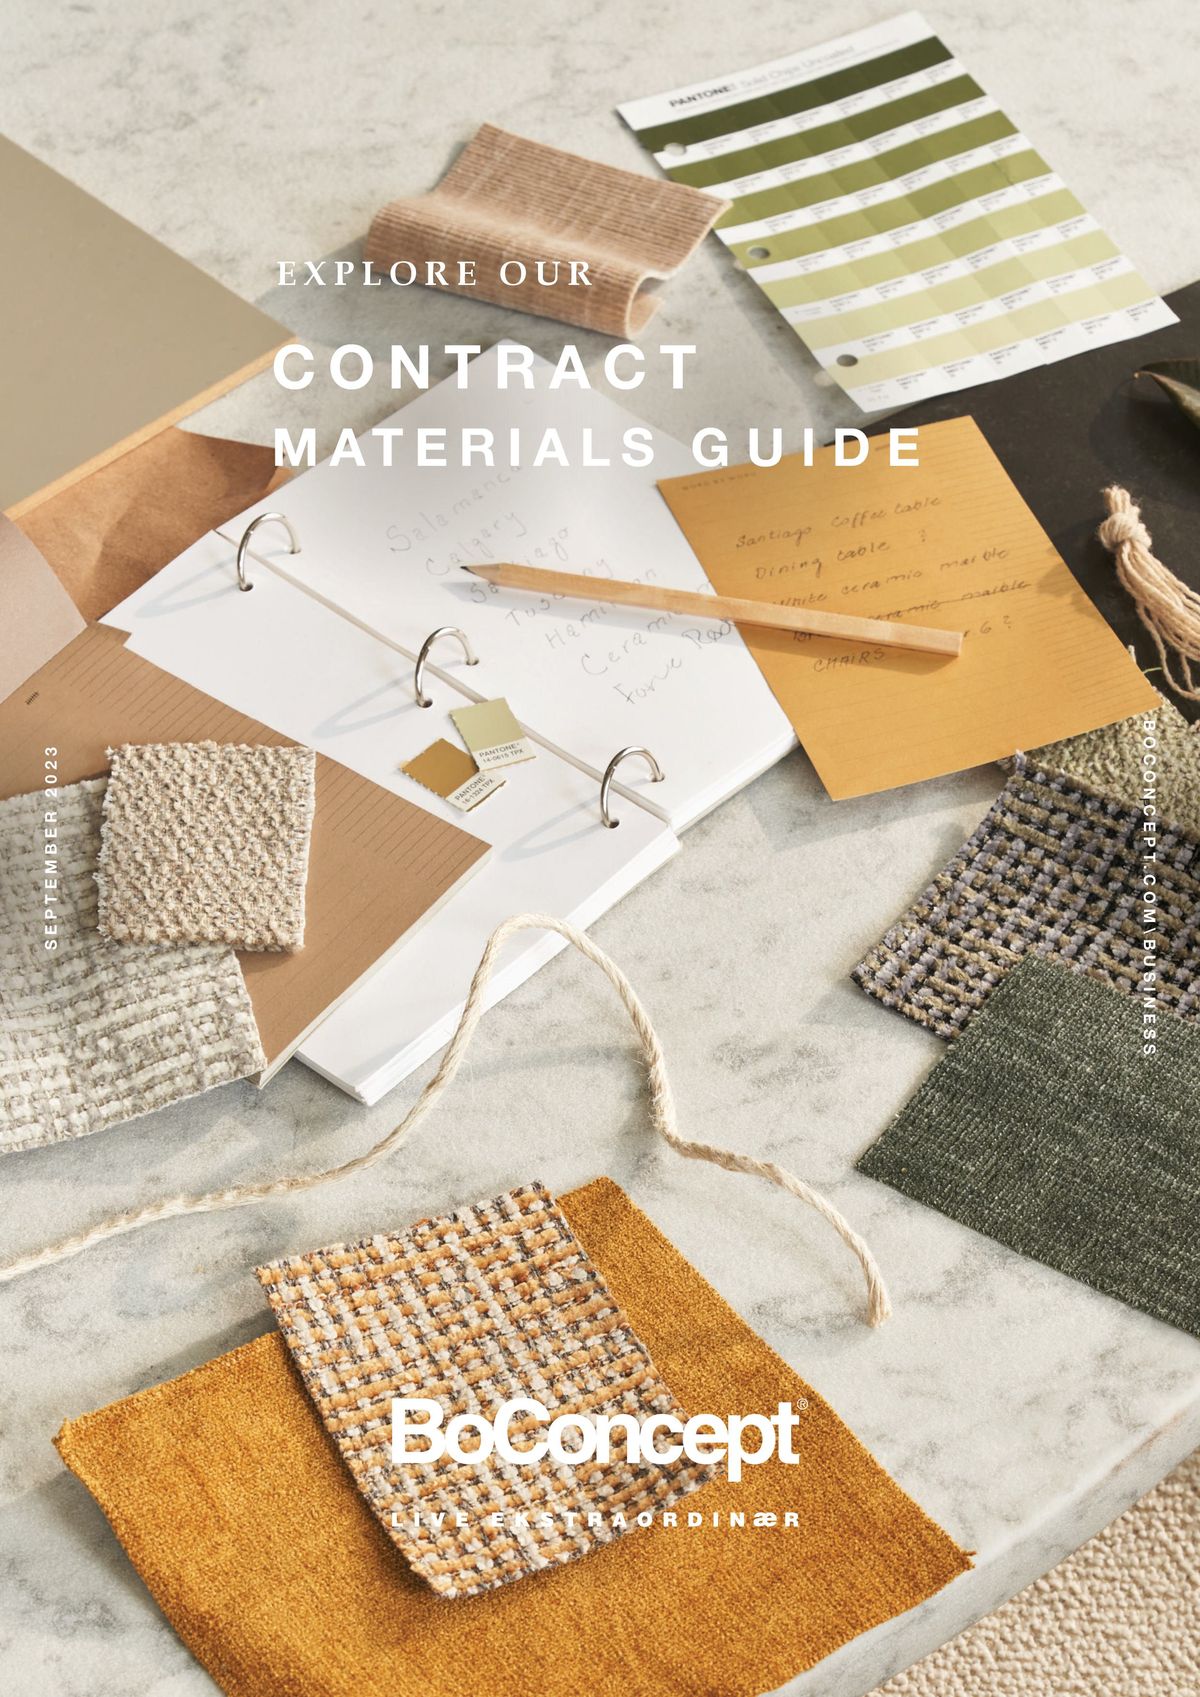 Catalogue Explore our contract materials guide, page 00001